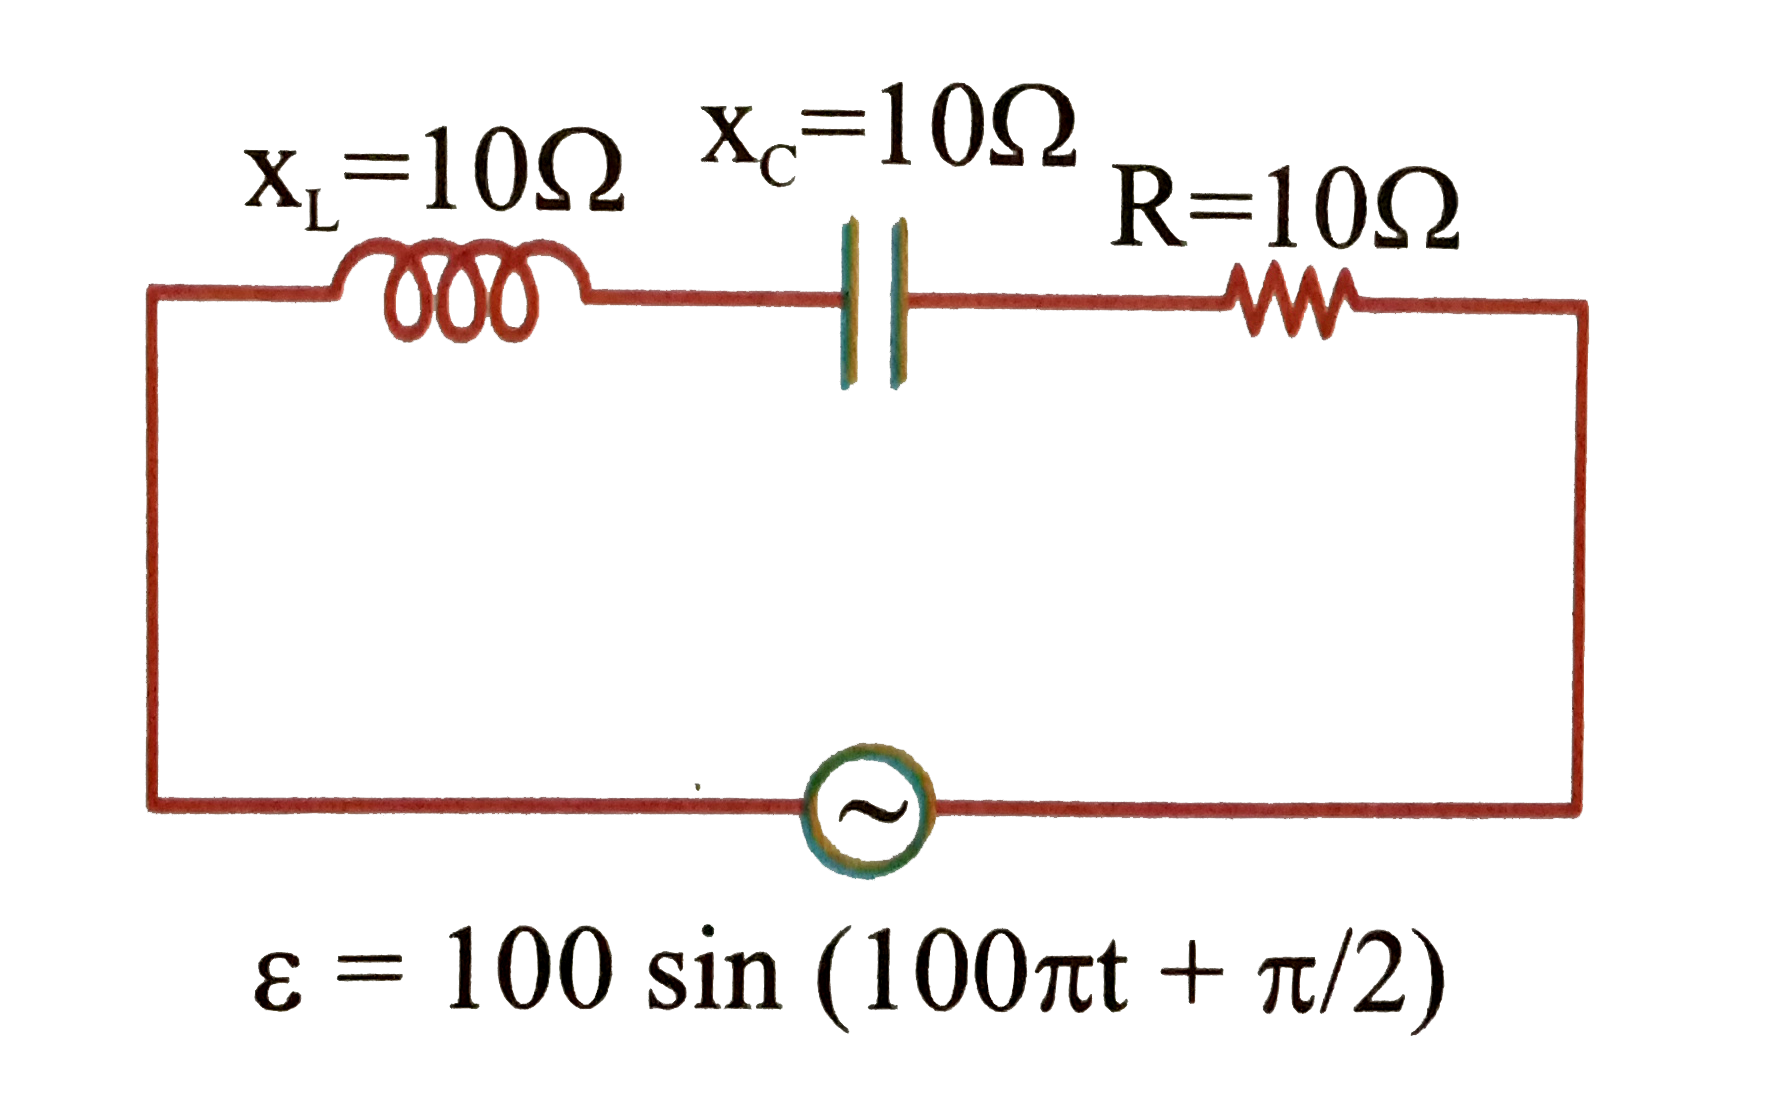 In the given AC, circuit, which of the following in incorrect: